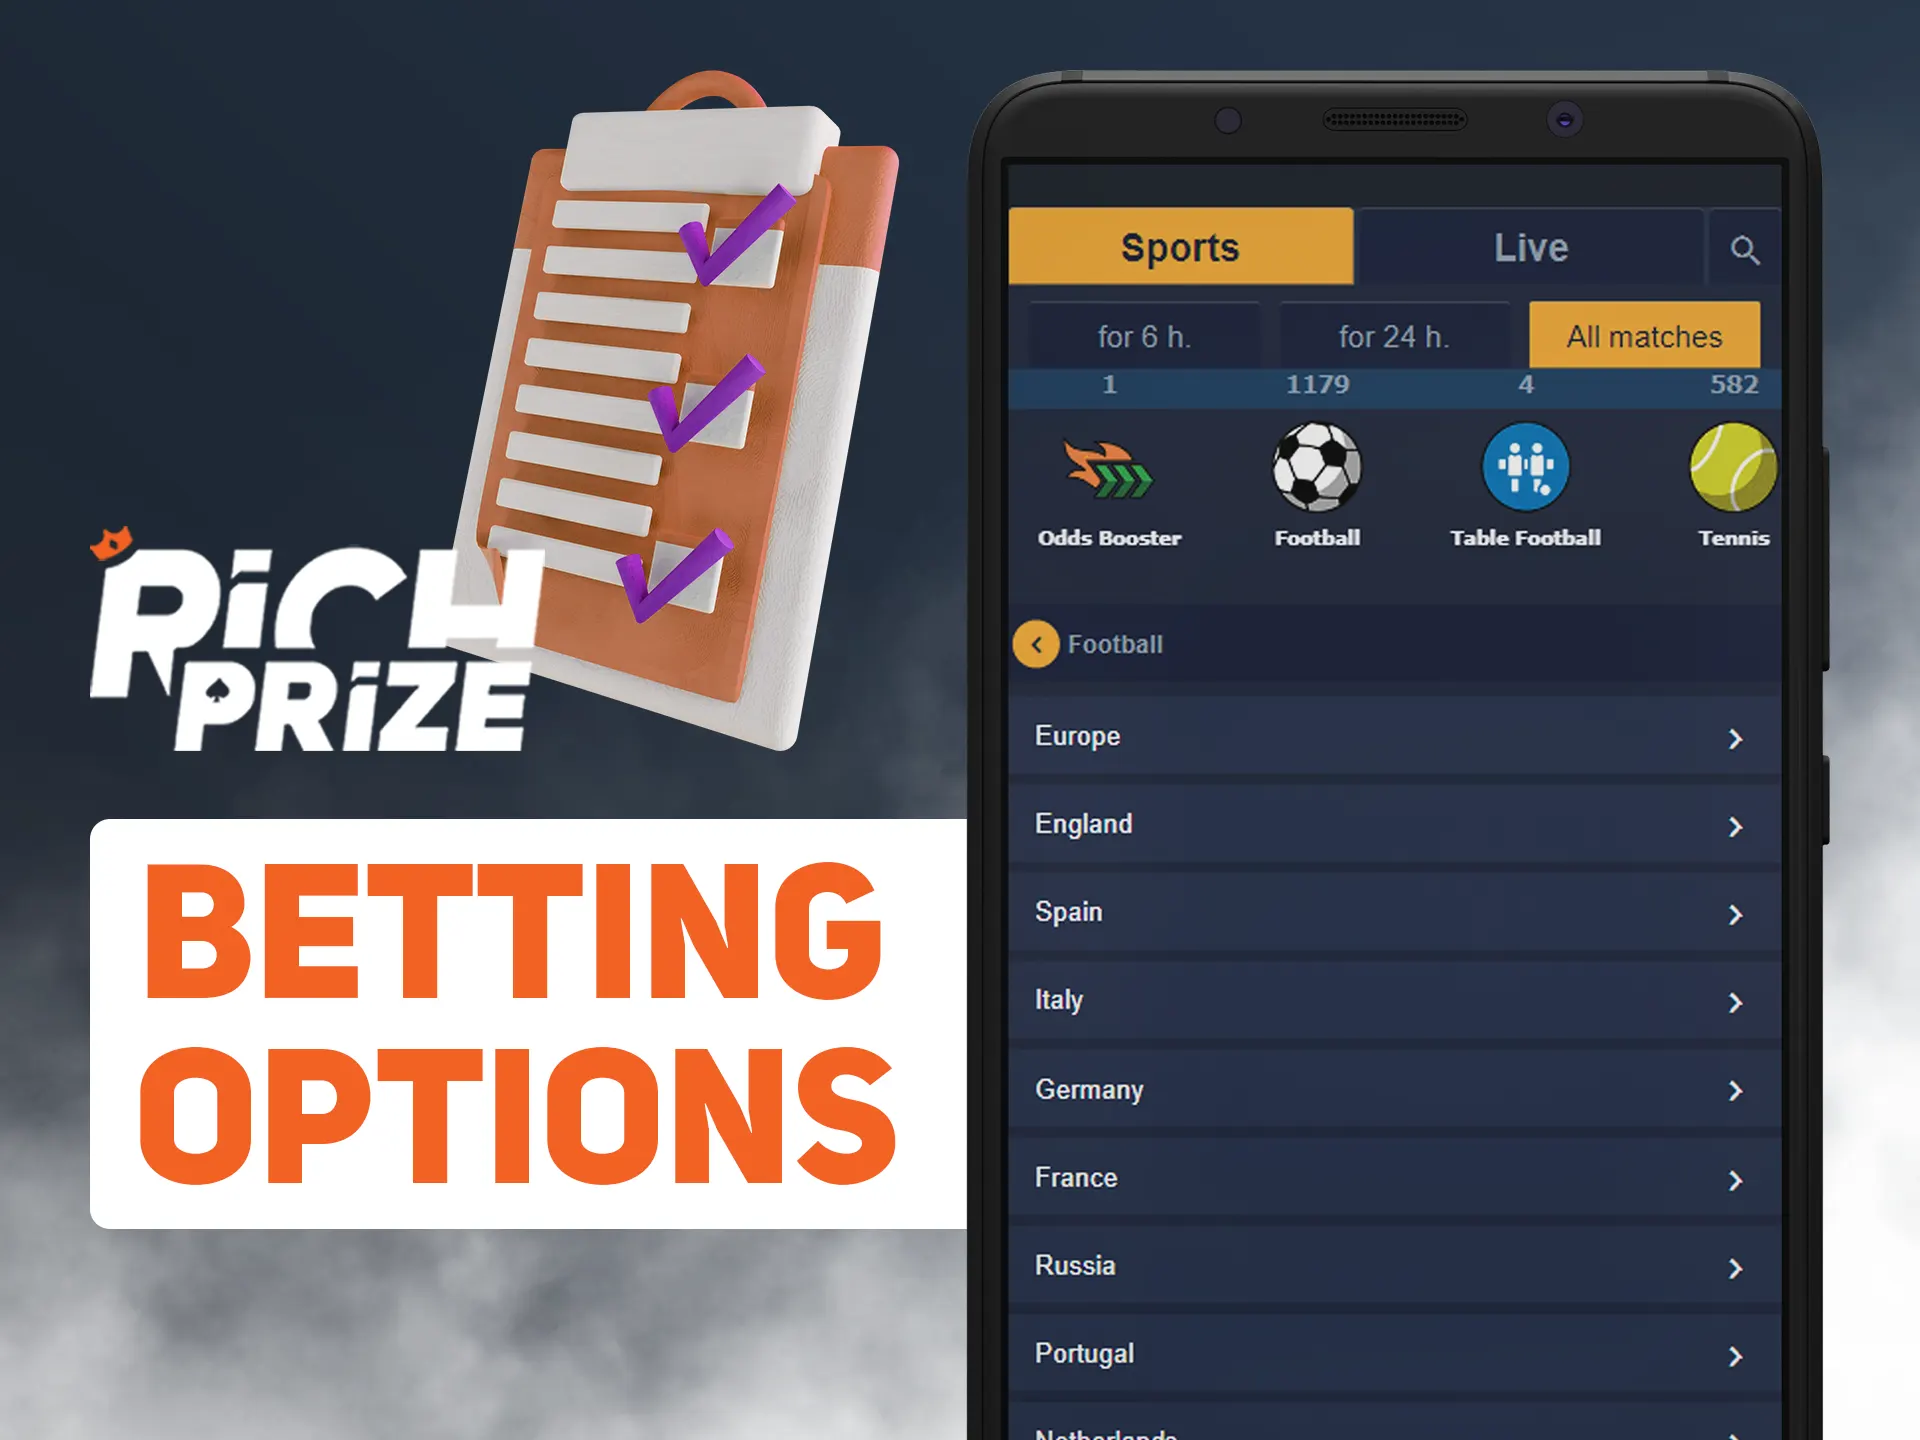 Choose how you want to bet in Richprize app.